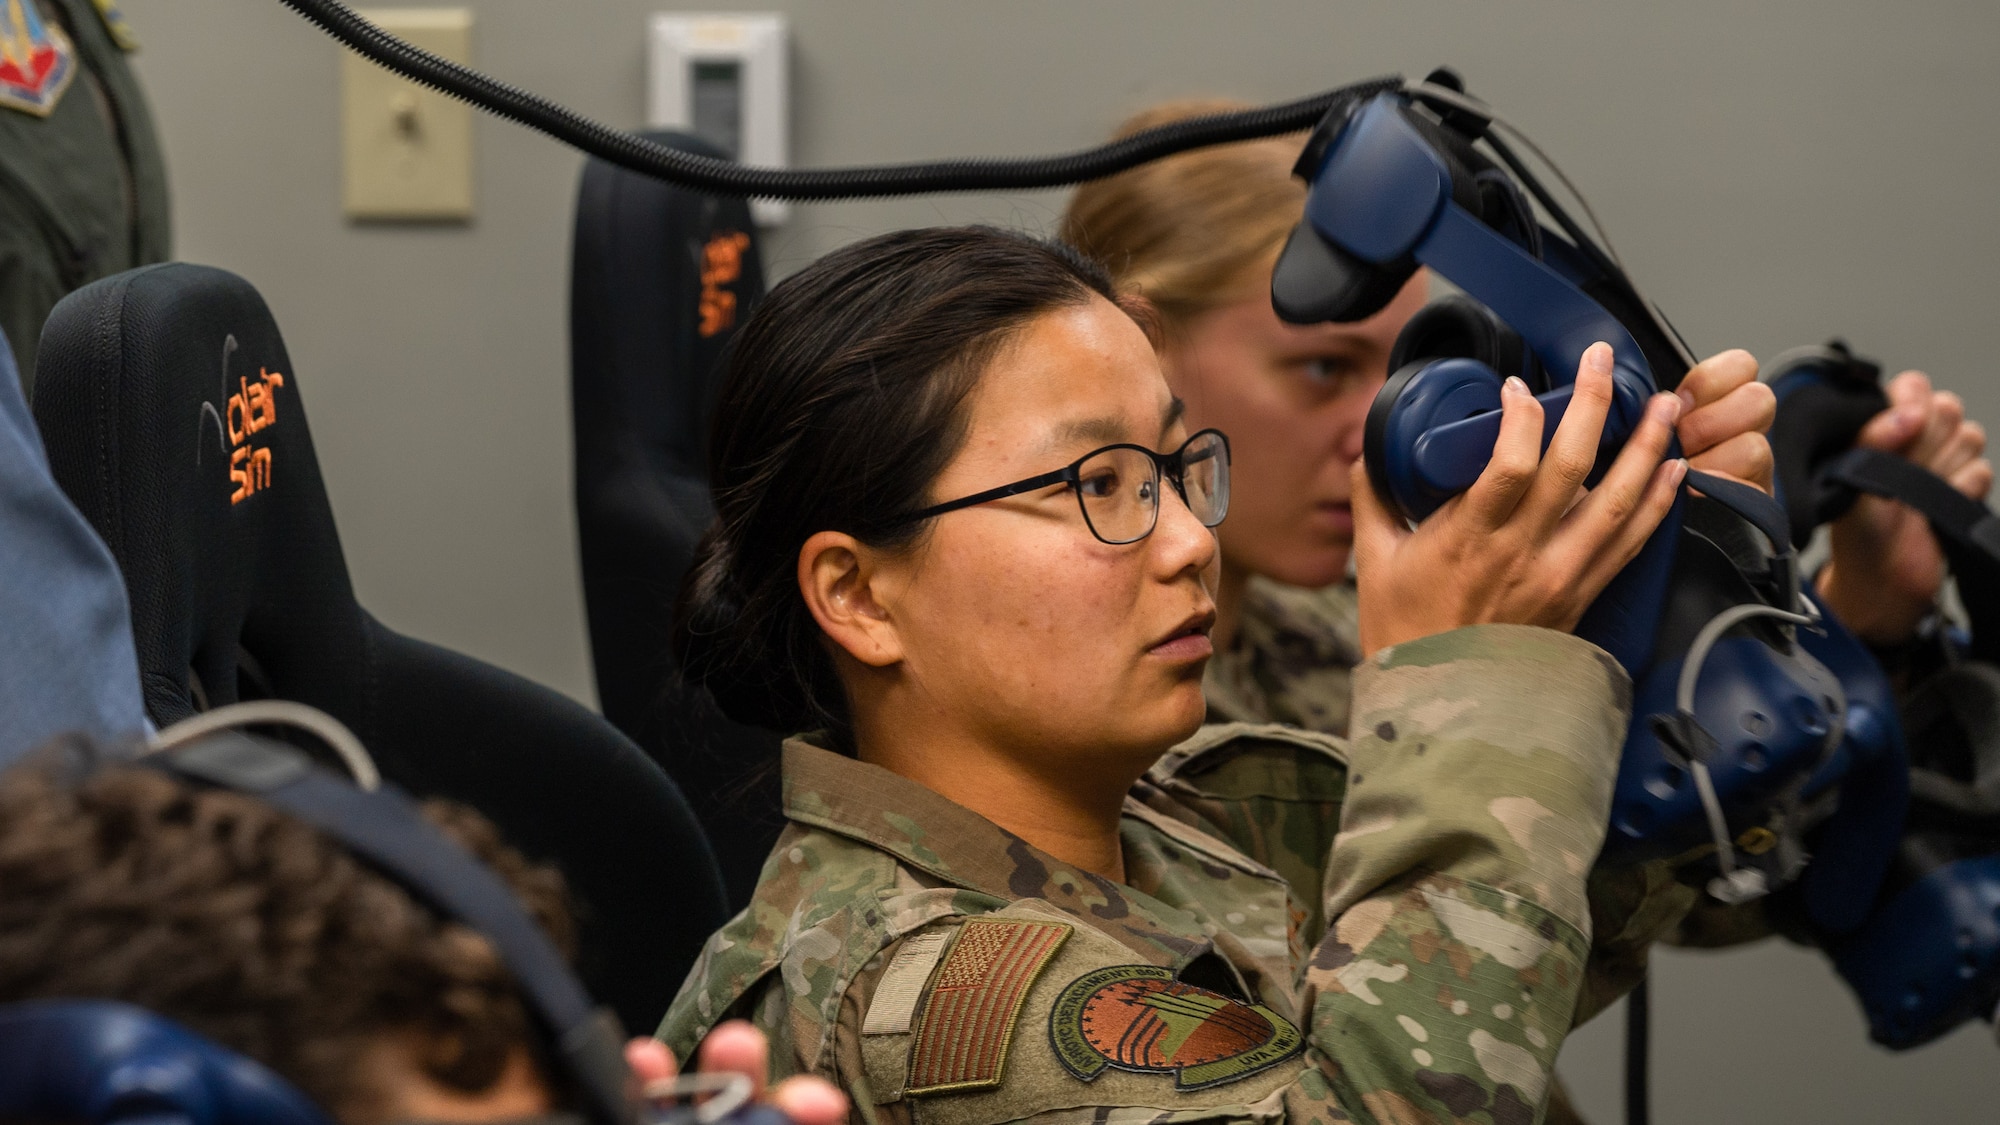 Air Force ROTC Cadet Tony Jade Lewis prepares to fly an F-15E Strike Eagle in a virtual reality training simulation at Seymour Johnson Air Force Base, North Carolina, August 3, 2023. Under the guidance of Capt. Victoria Beck, 334th Fighter Squadron weapons safety officer and Capt. Cecilia “Feisty” Tuma, a pilot assigned to the 333rd Fighter Squadron, the cadets attempted to take-off, attack both airborne and land targets and land during the simulation. (U.S. Air Force photo by Airman 1st Class Leighton Lucero)